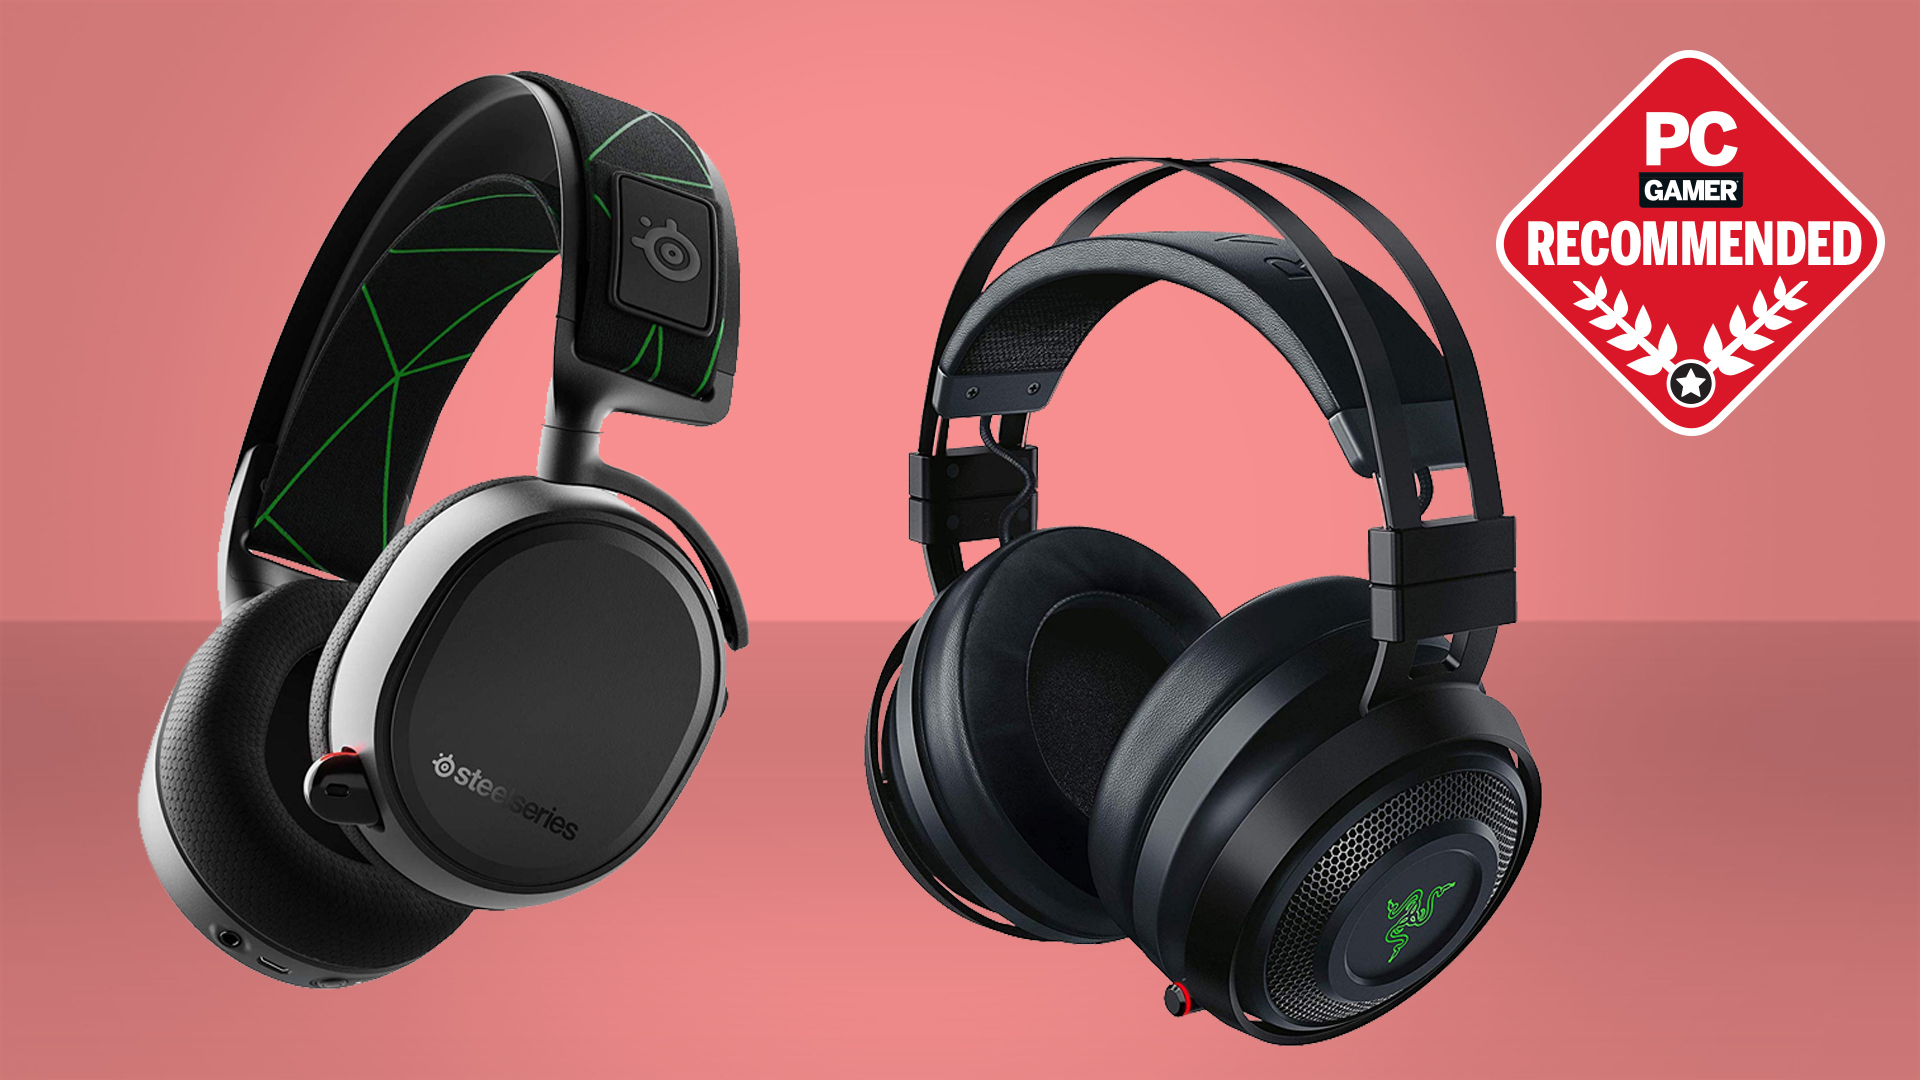 Best Gaming Headset 2021 The Best Gaming Headsets In 2021 Pc Gamer